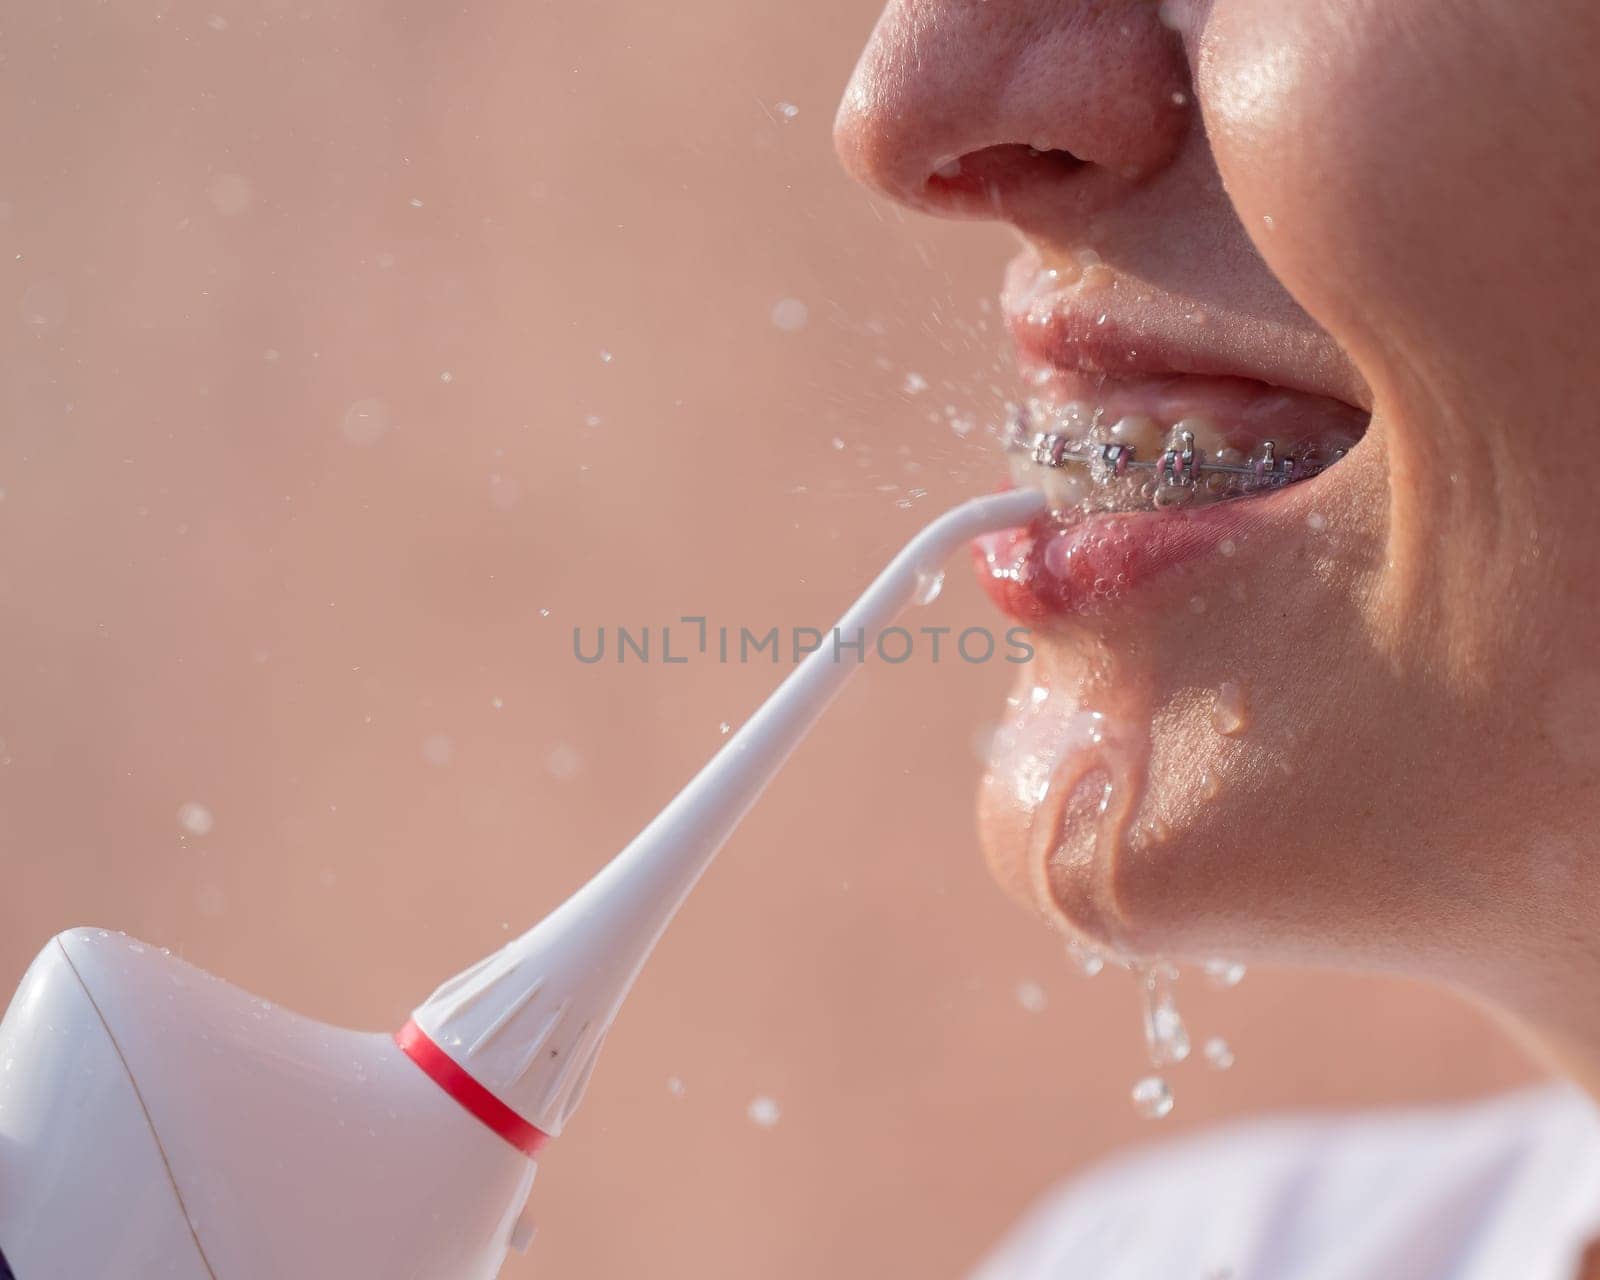 A woman with braces on her teeth uses an irrigator. Close-up portrait